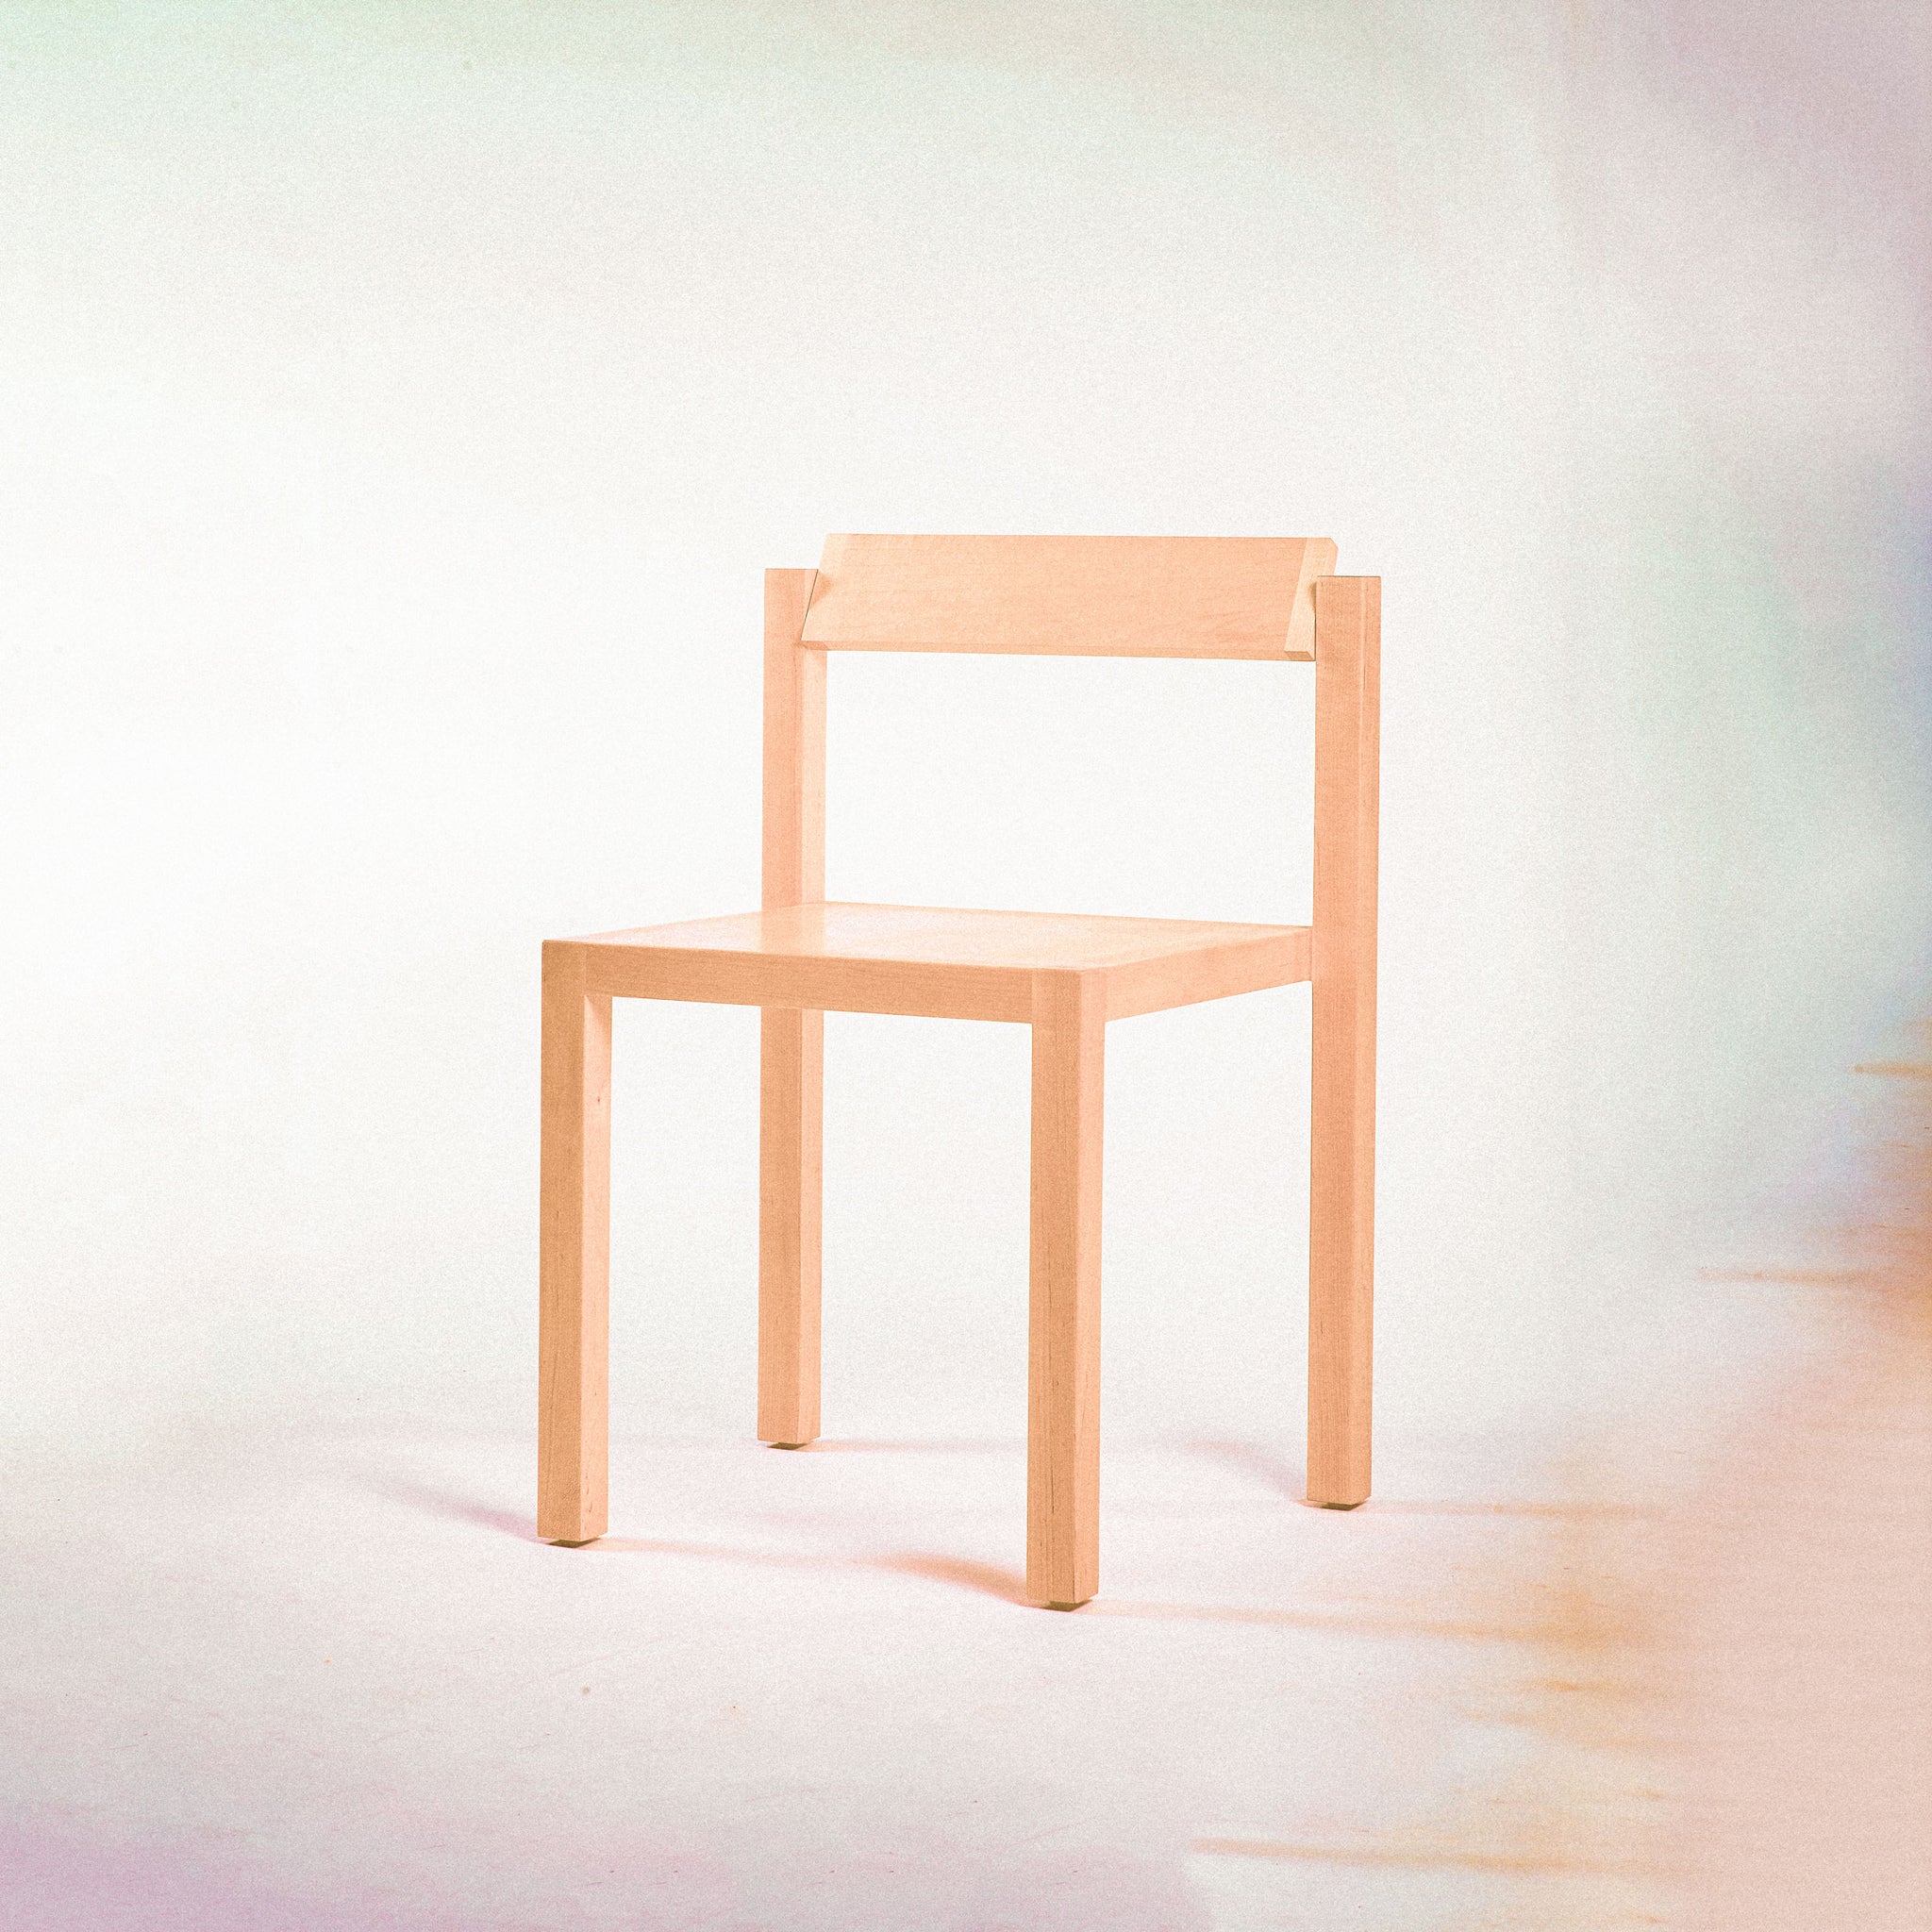 Feature shot of an Anything Chair on a white backdrop.